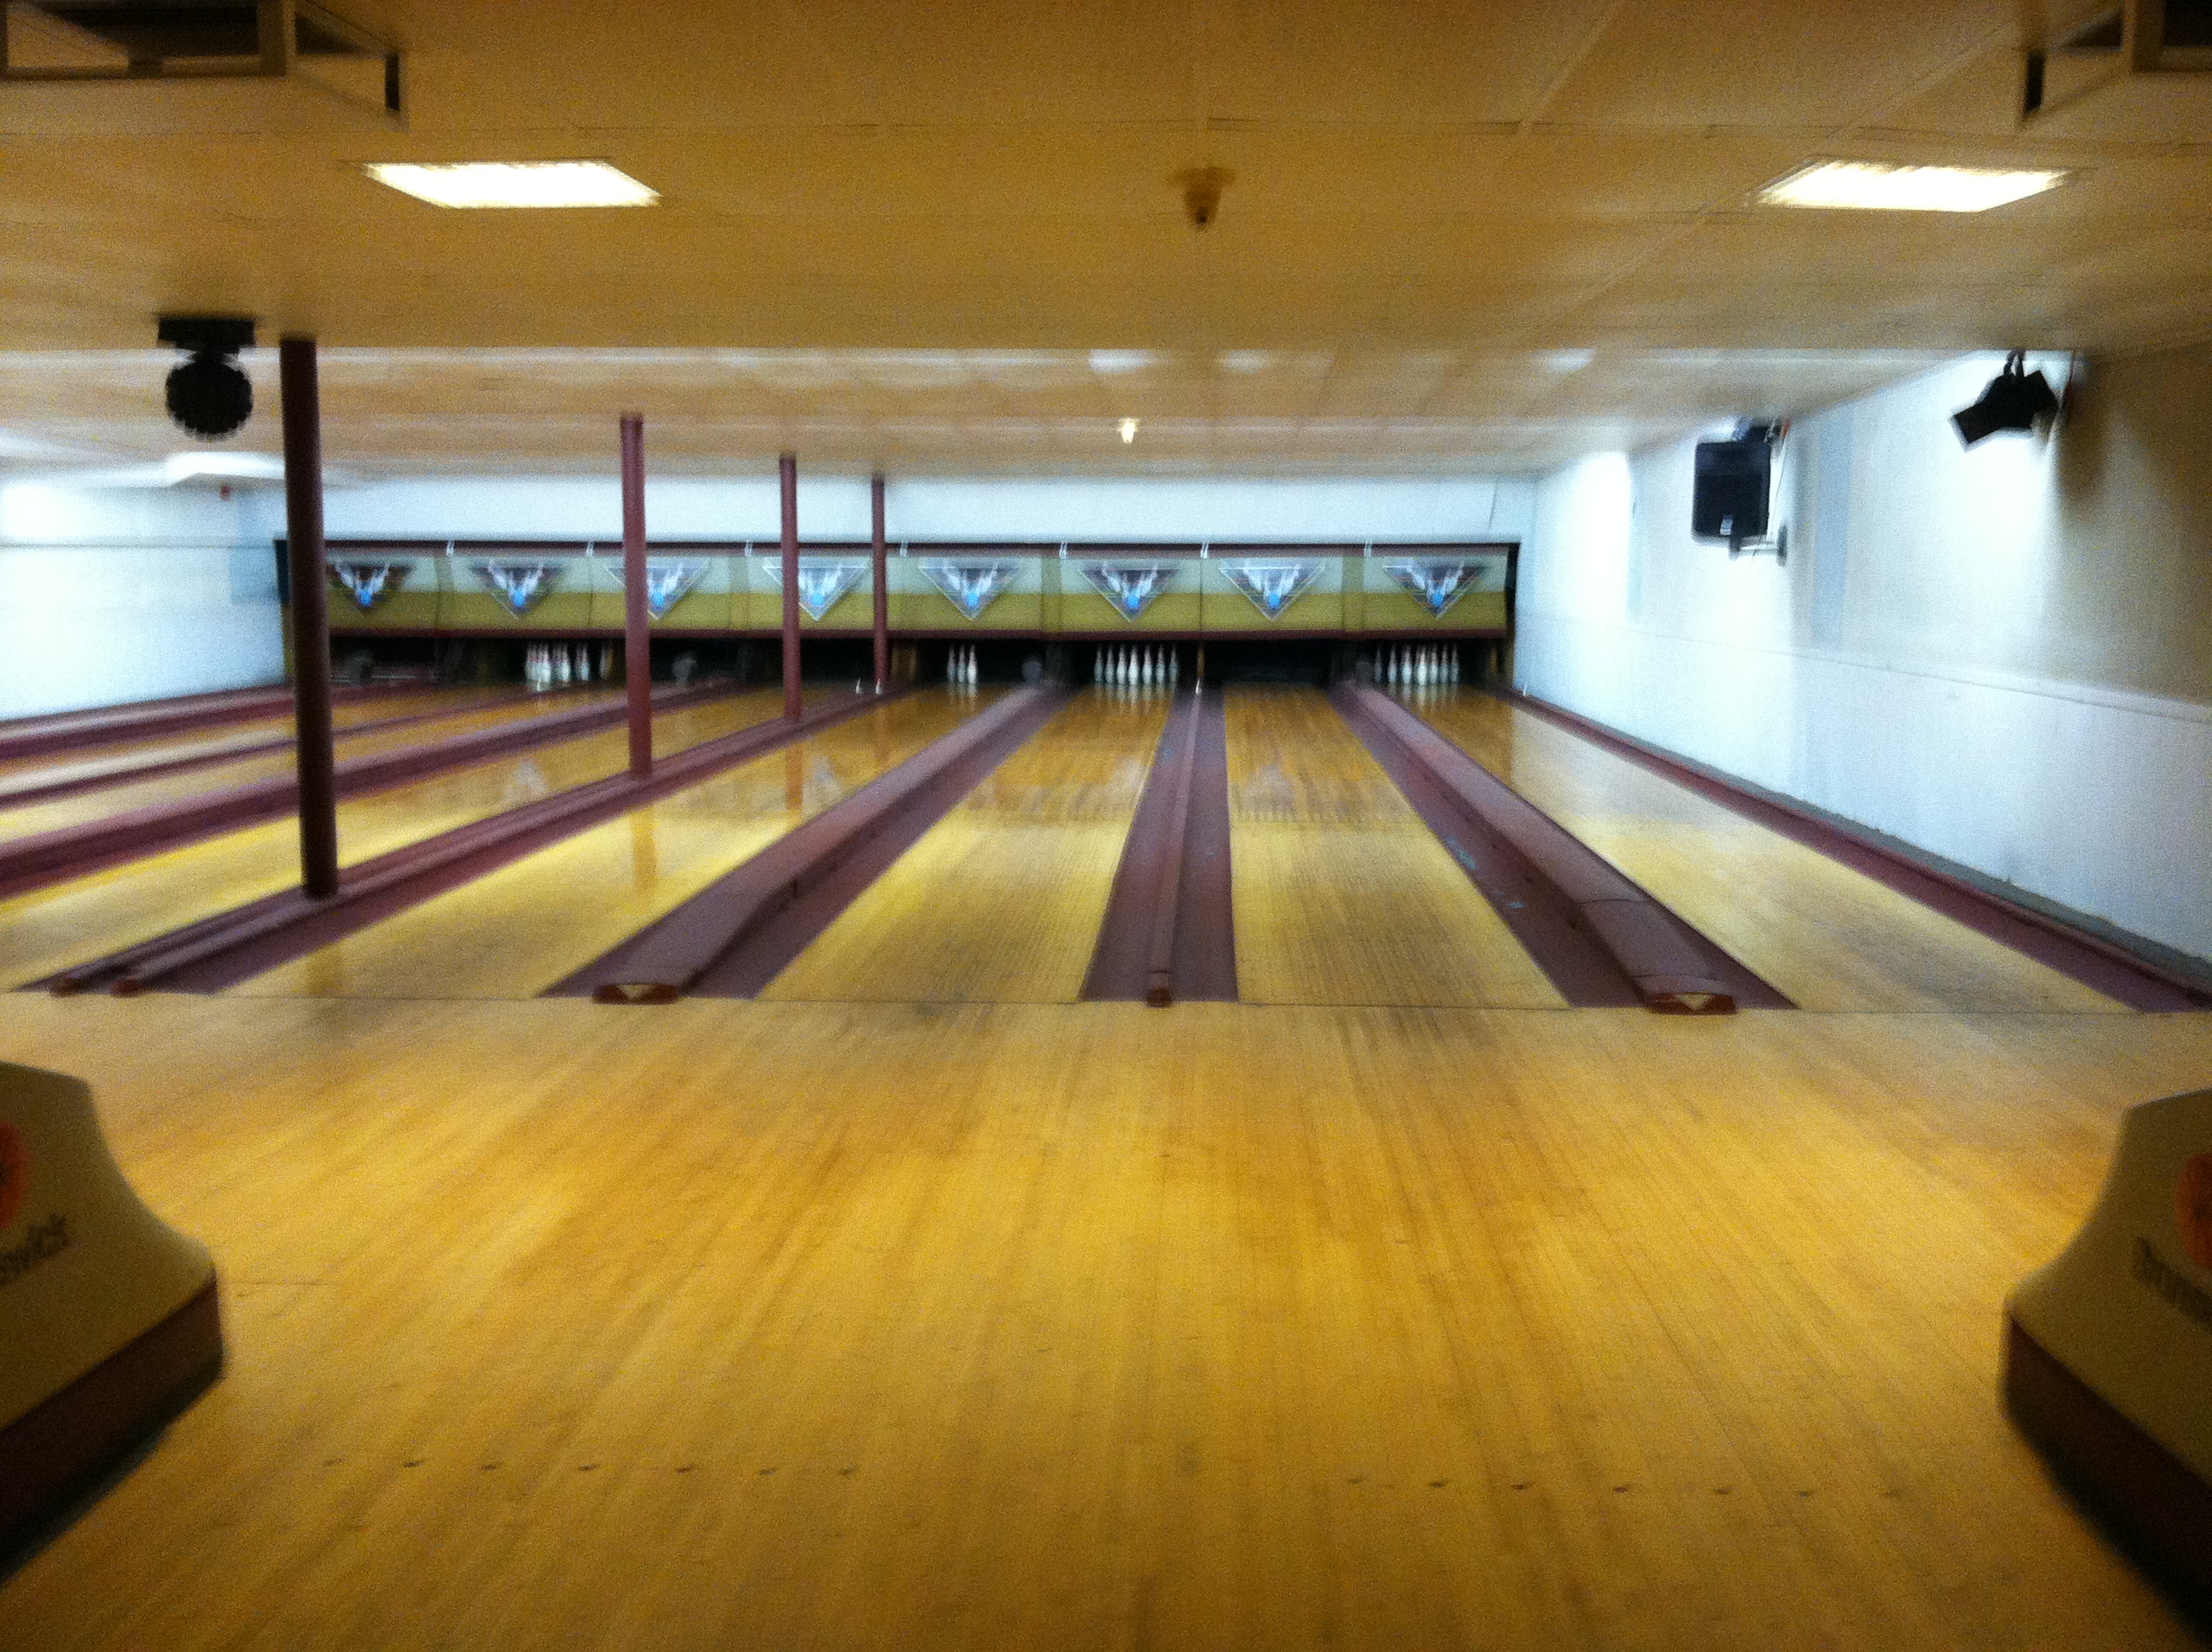 Bowling Alley Project | Indiegogo